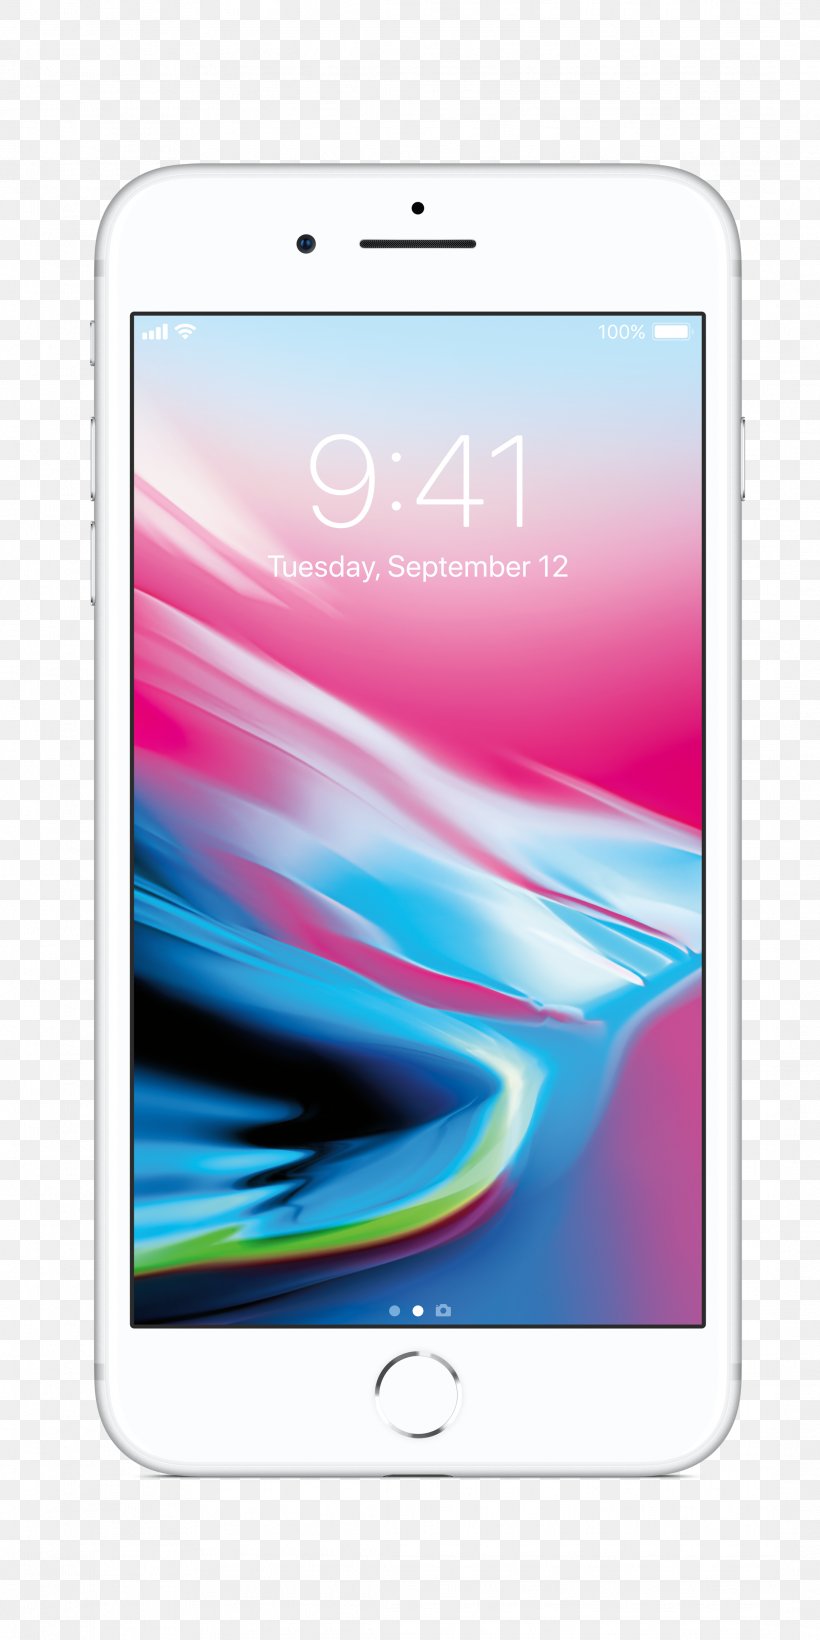 IPhone X Telephone Apple Smartphone 4G, PNG, 2169x4339px, Iphone X, Apple, Apple A11, Communication Device, Electronic Device Download Free